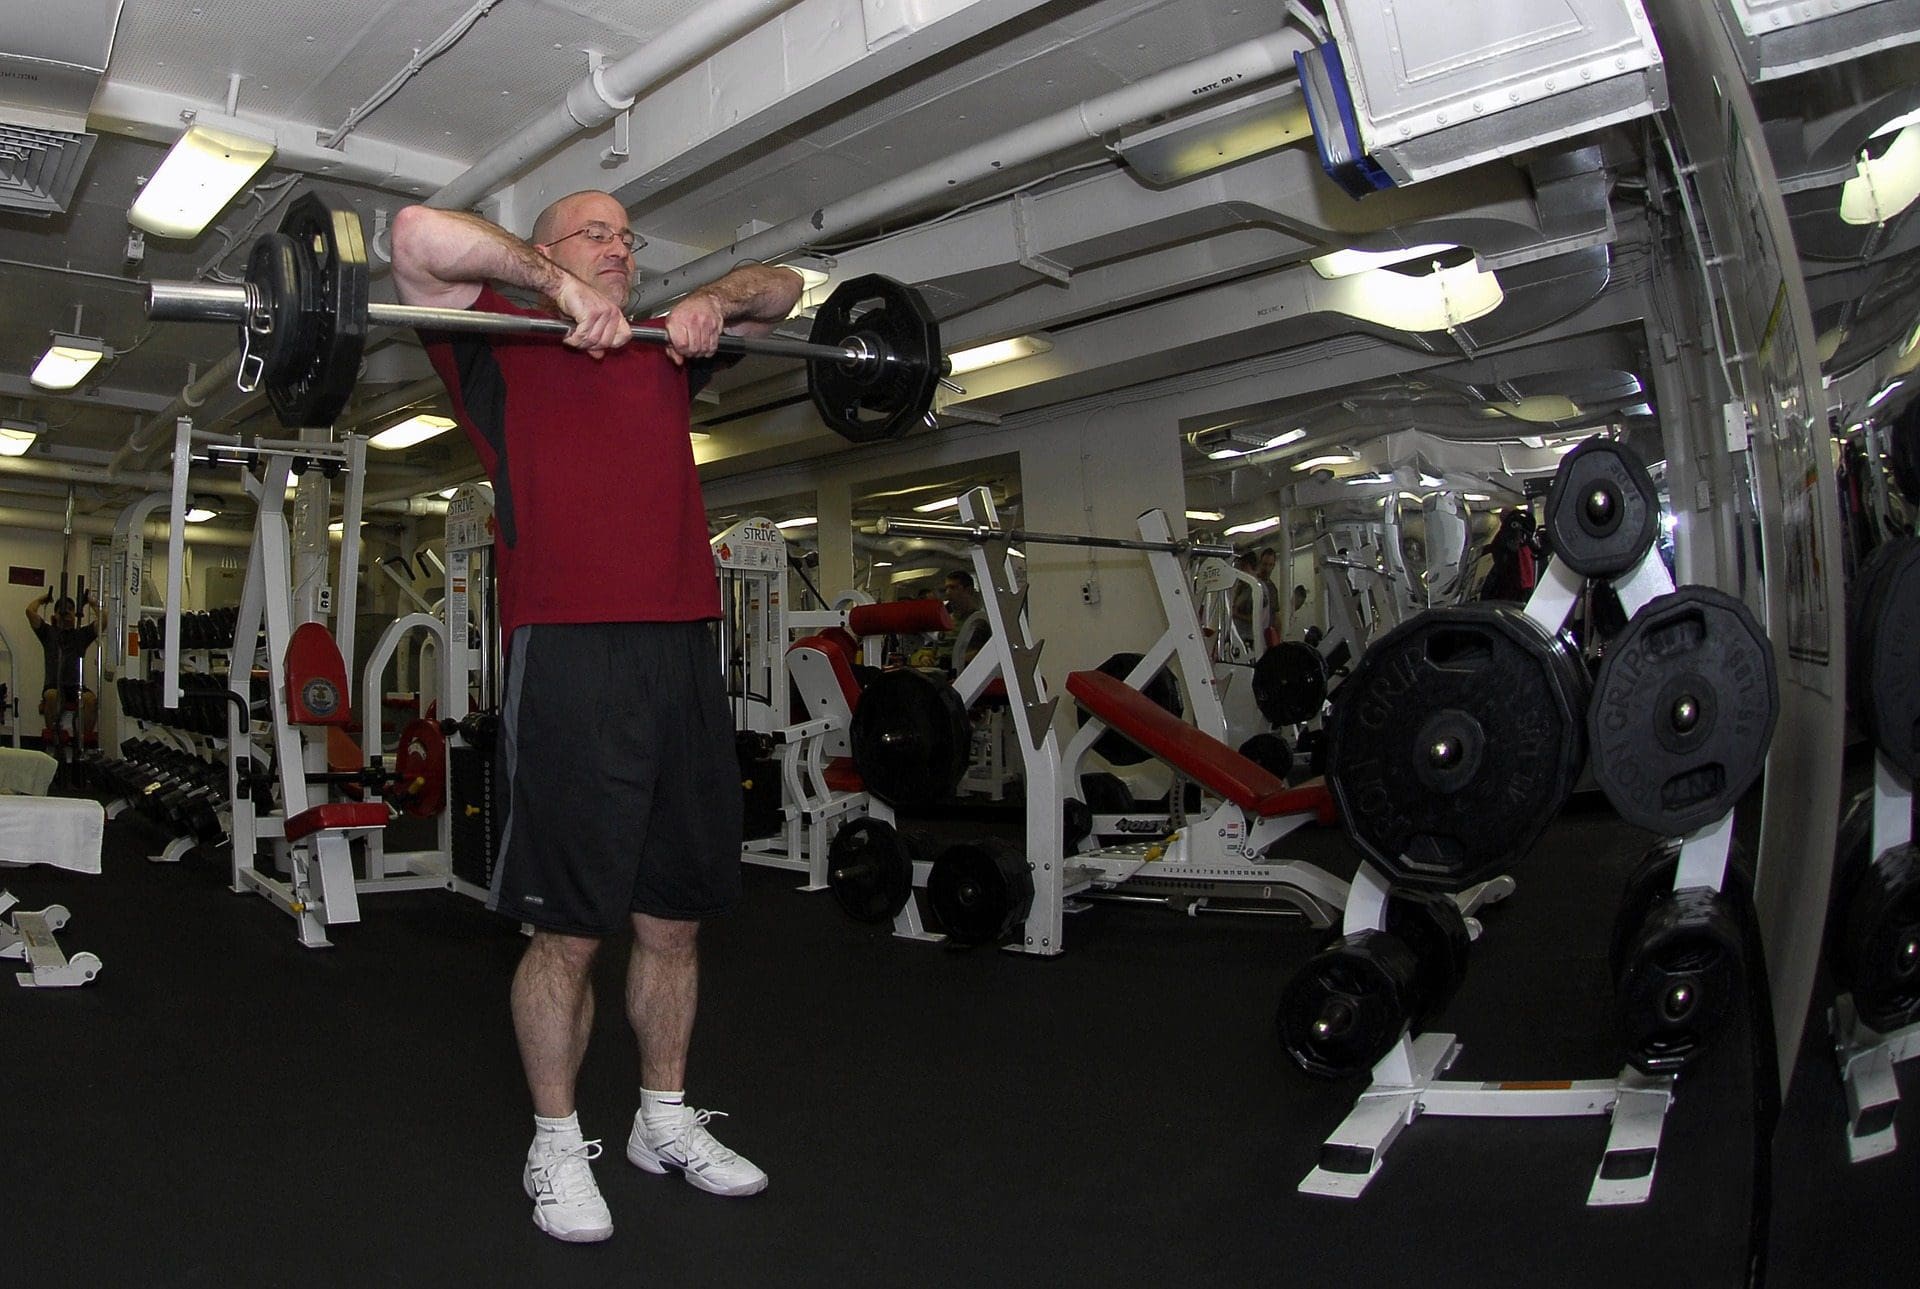 blog picture of older man in gym lifting weights